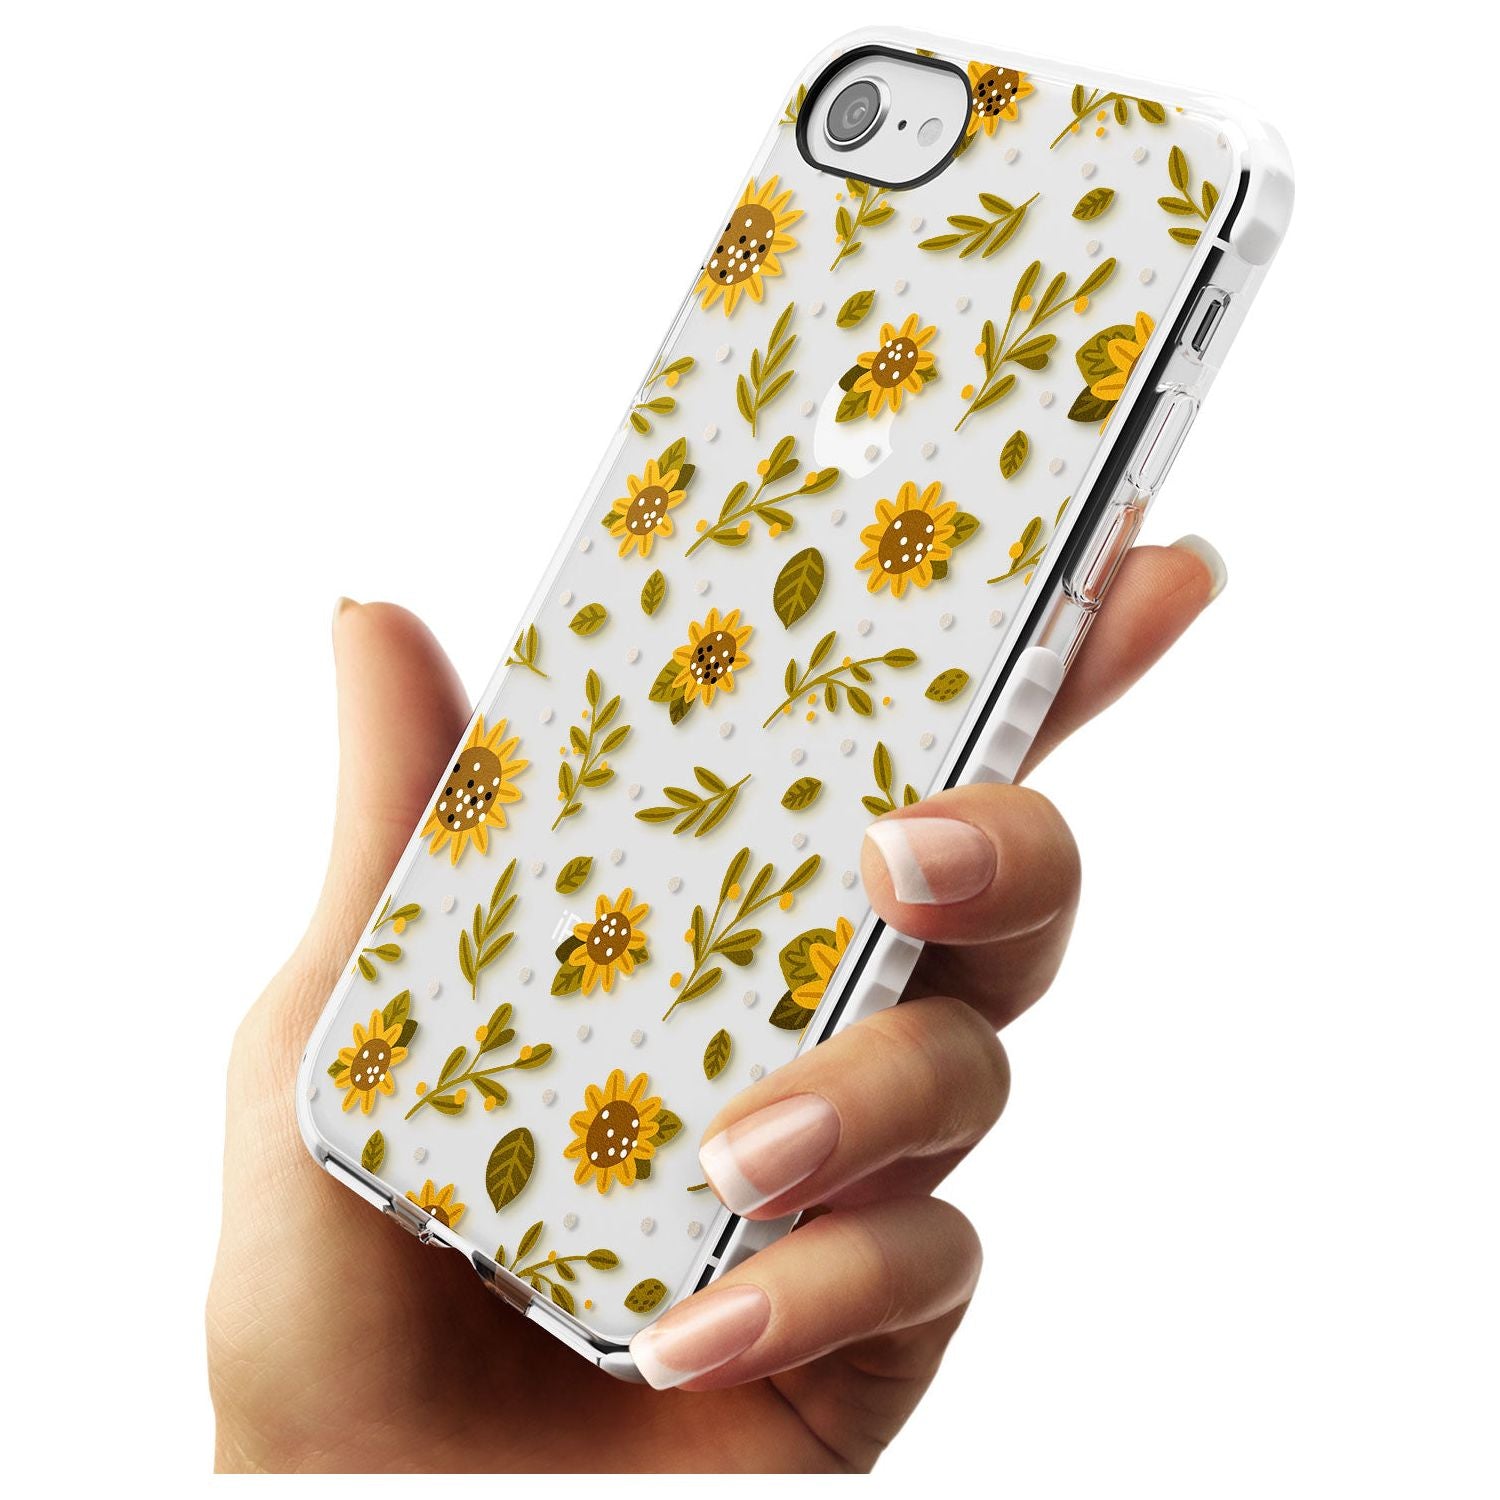 Sweet as Honey Patterns: Sunflowers (Clear) Impact Phone Case for iPhone SE 8 7 Plus